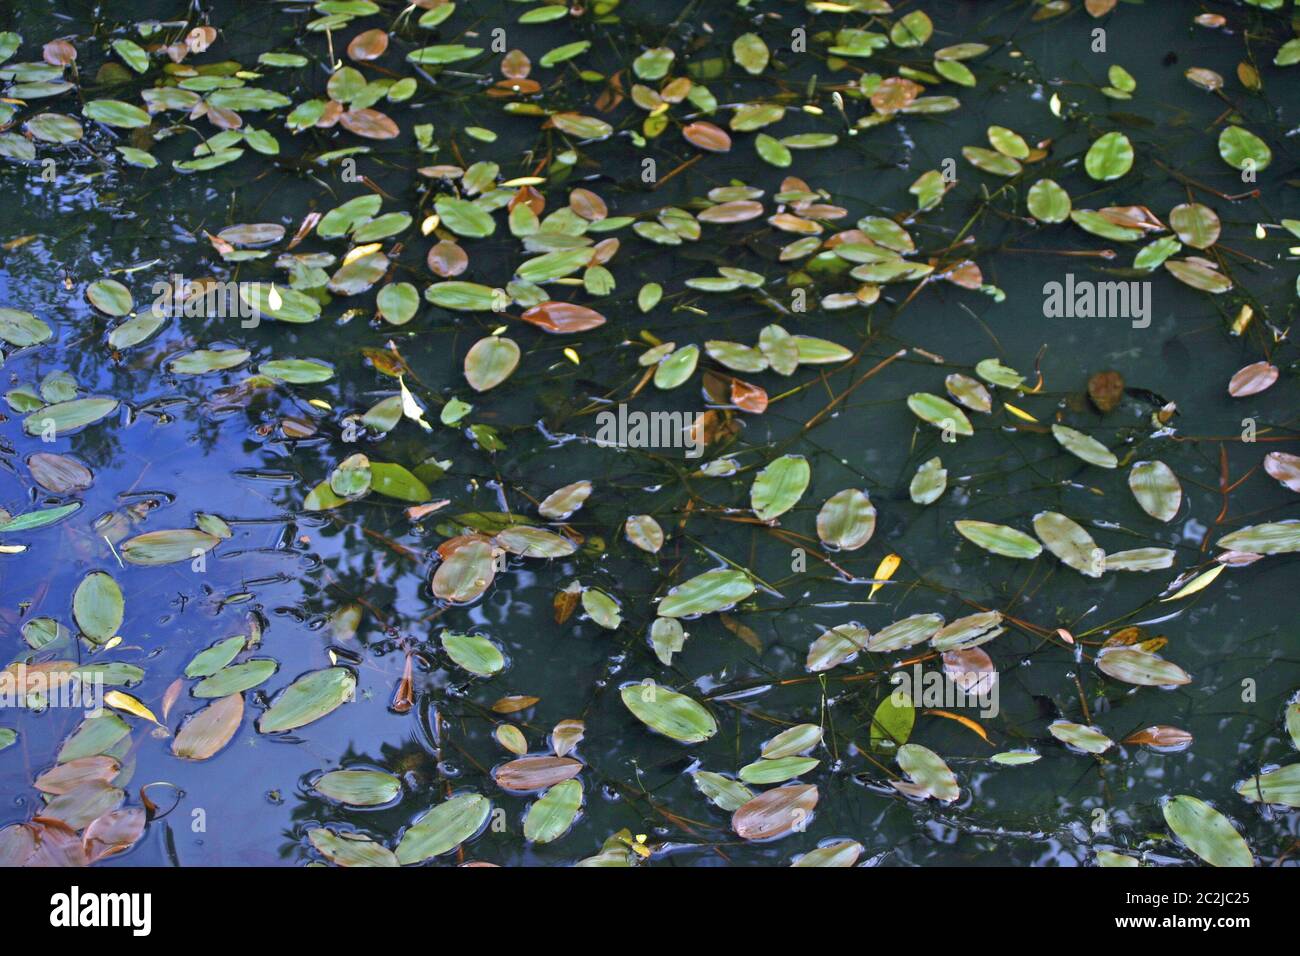 Broad-leaved pondweed (Potamogeton natans) floating leaves on a pond surface with reflections. Stock Photo